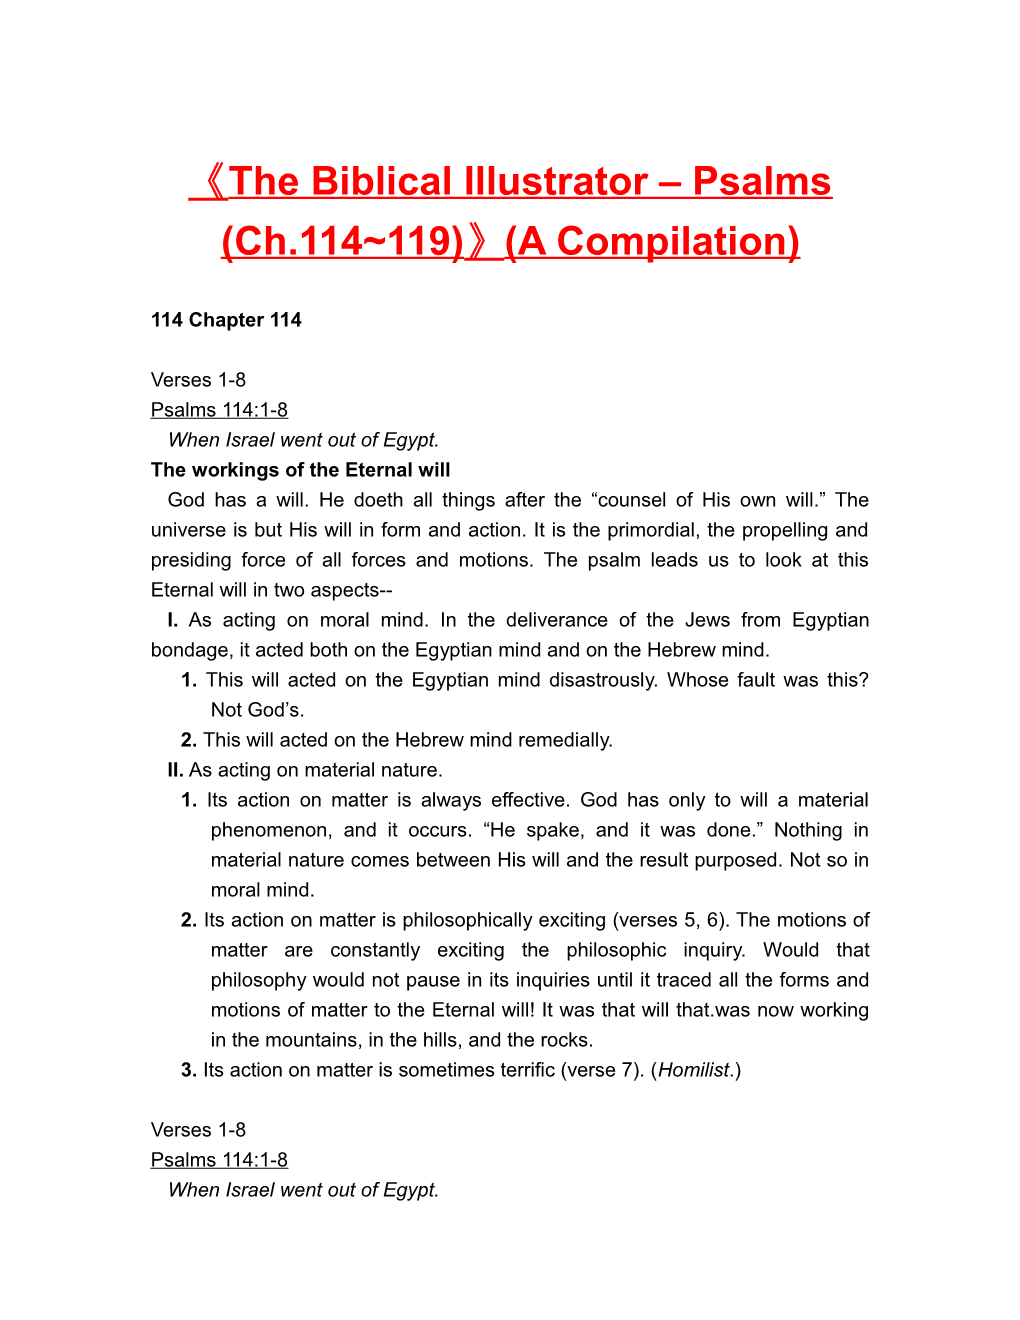 The Biblical Illustrator Psalms (Ch.114 119) (A Compilation)